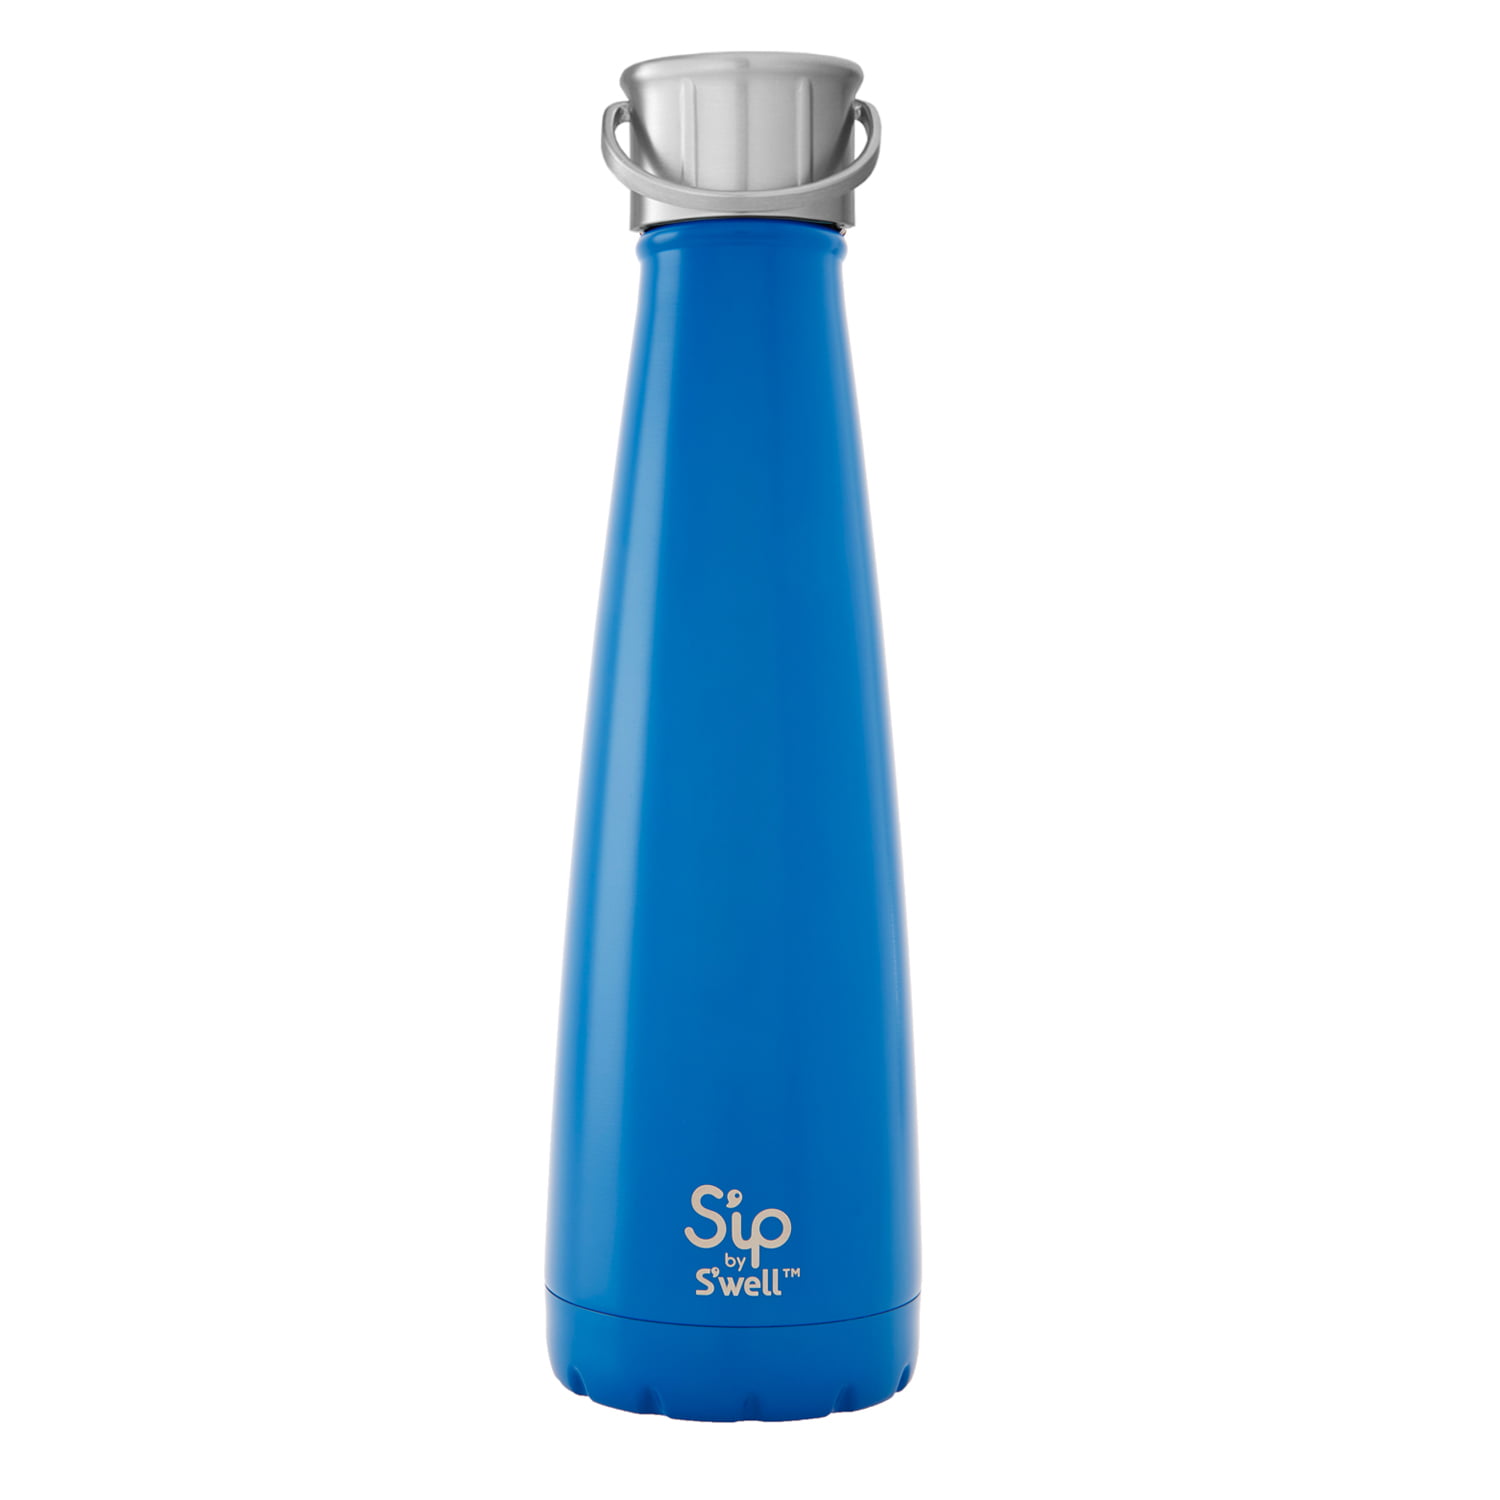 S'ip by S'well Vacuum Insulated Stainless Steel Water Bottle, Jersey Blue,  15 oz 